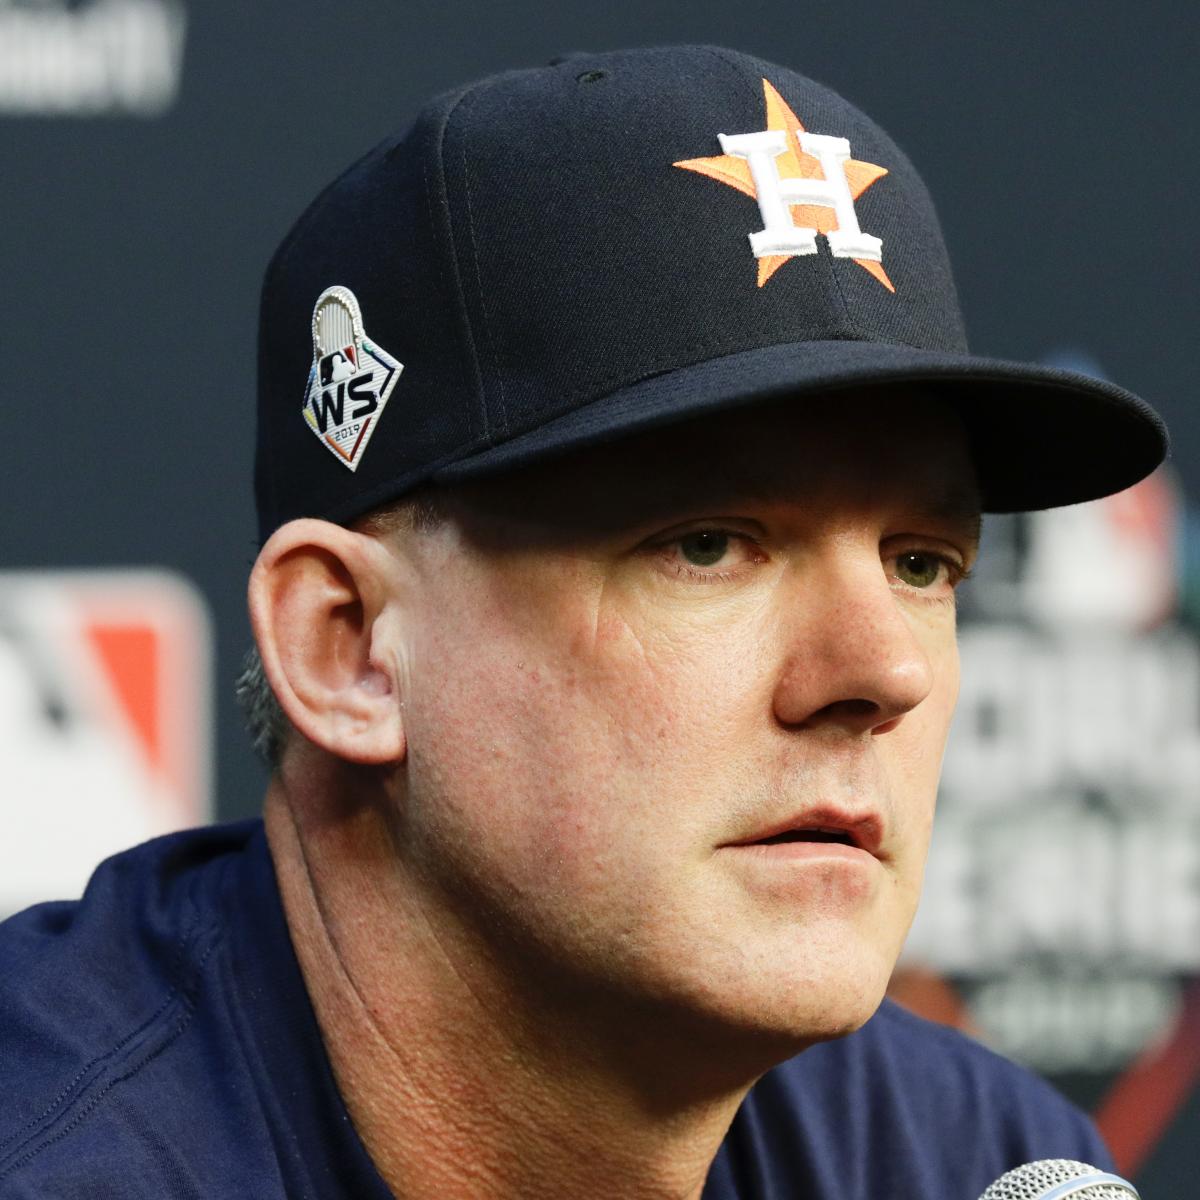 Tigers Manager A.J. Hinch Says He Gotten smaller COVID-19 in September